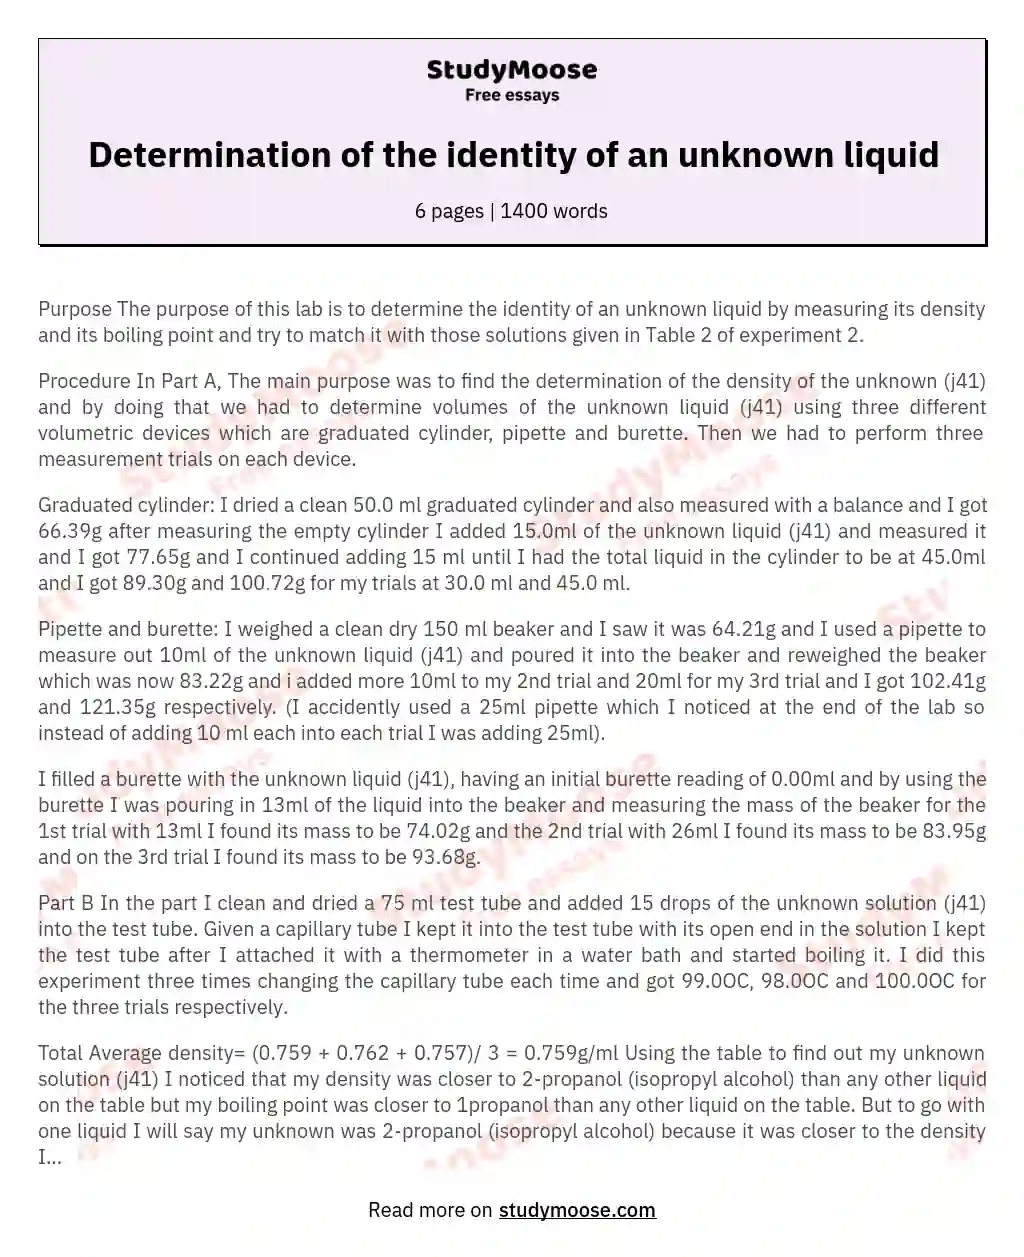 Determination of the identity of an unknown liquid essay